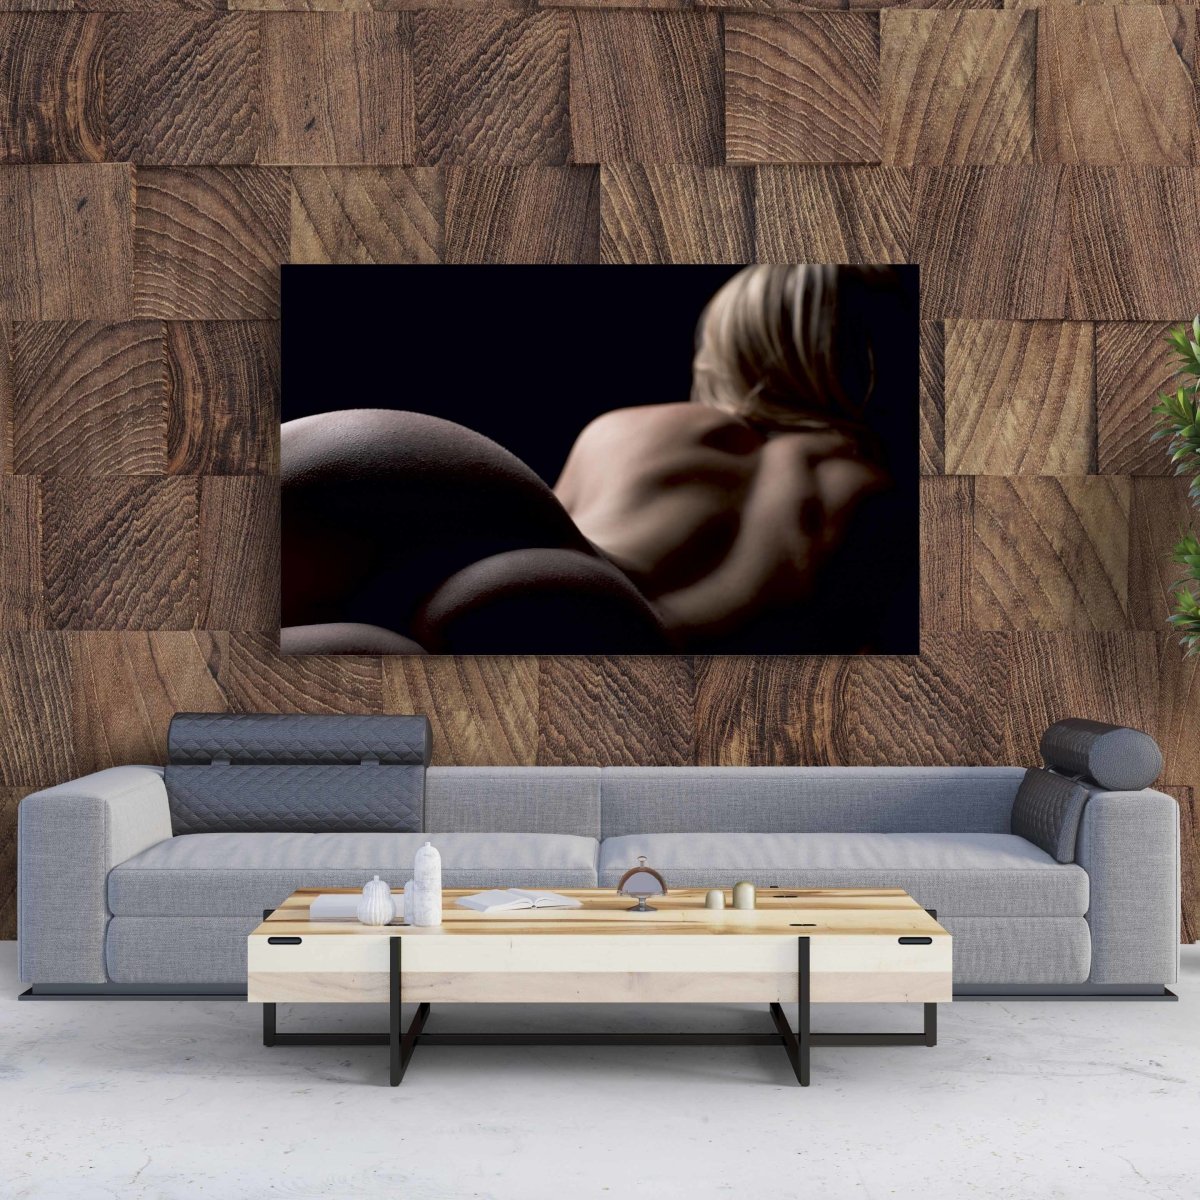 Tablou Canvas Nude Blonde Woman - clevny.ro